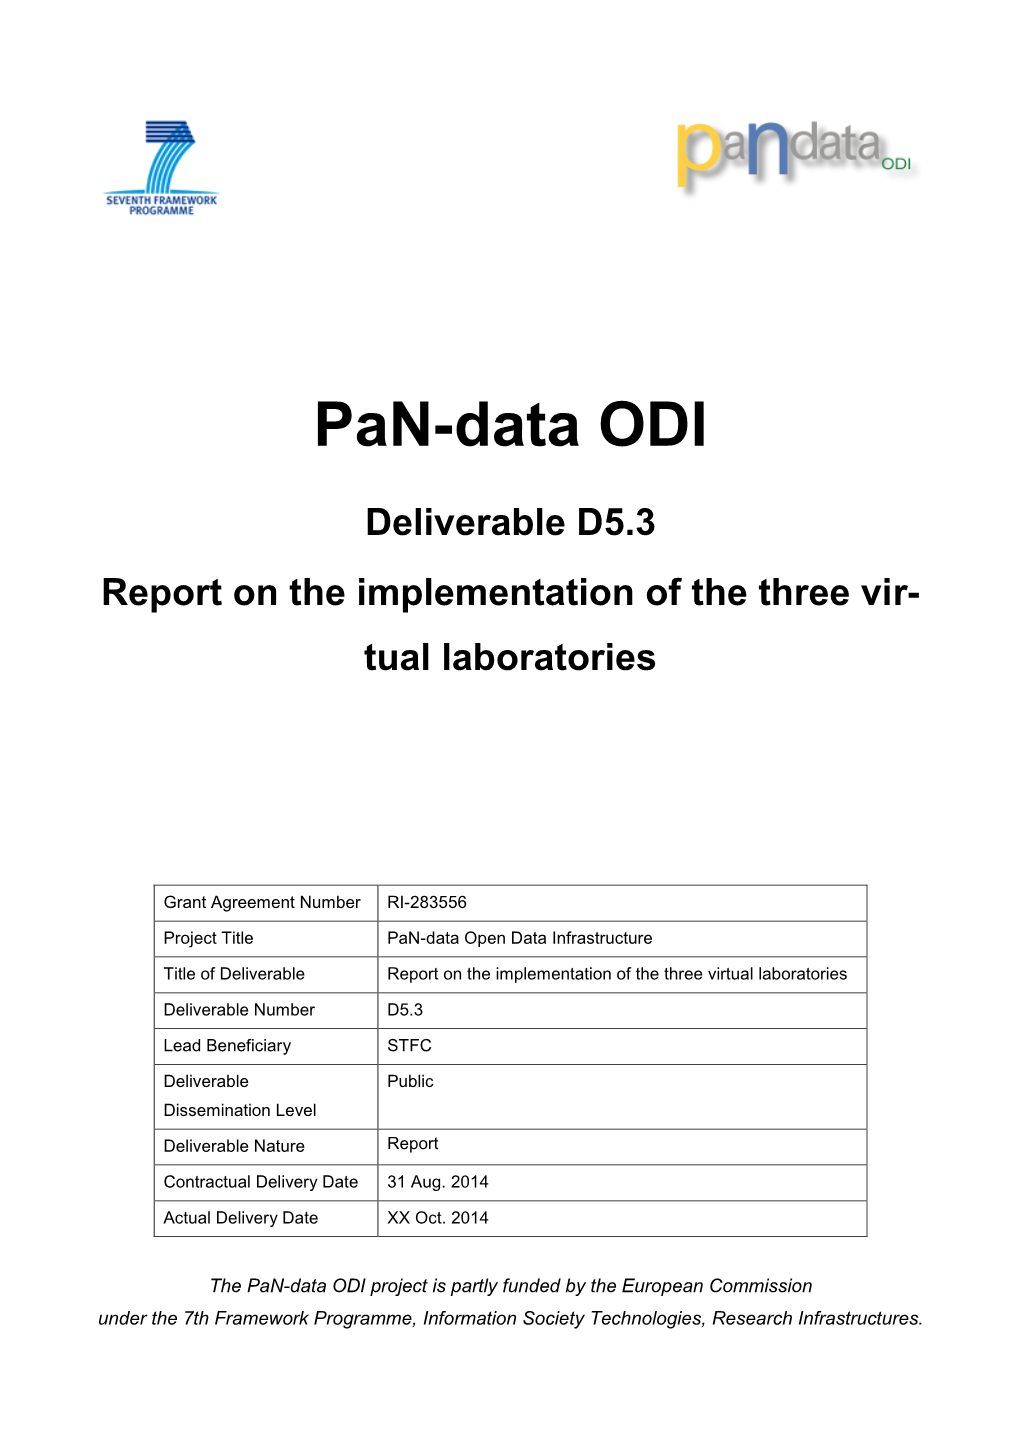 D5.3 Report on the Implementation of the Three Vir- Tual Laboratories